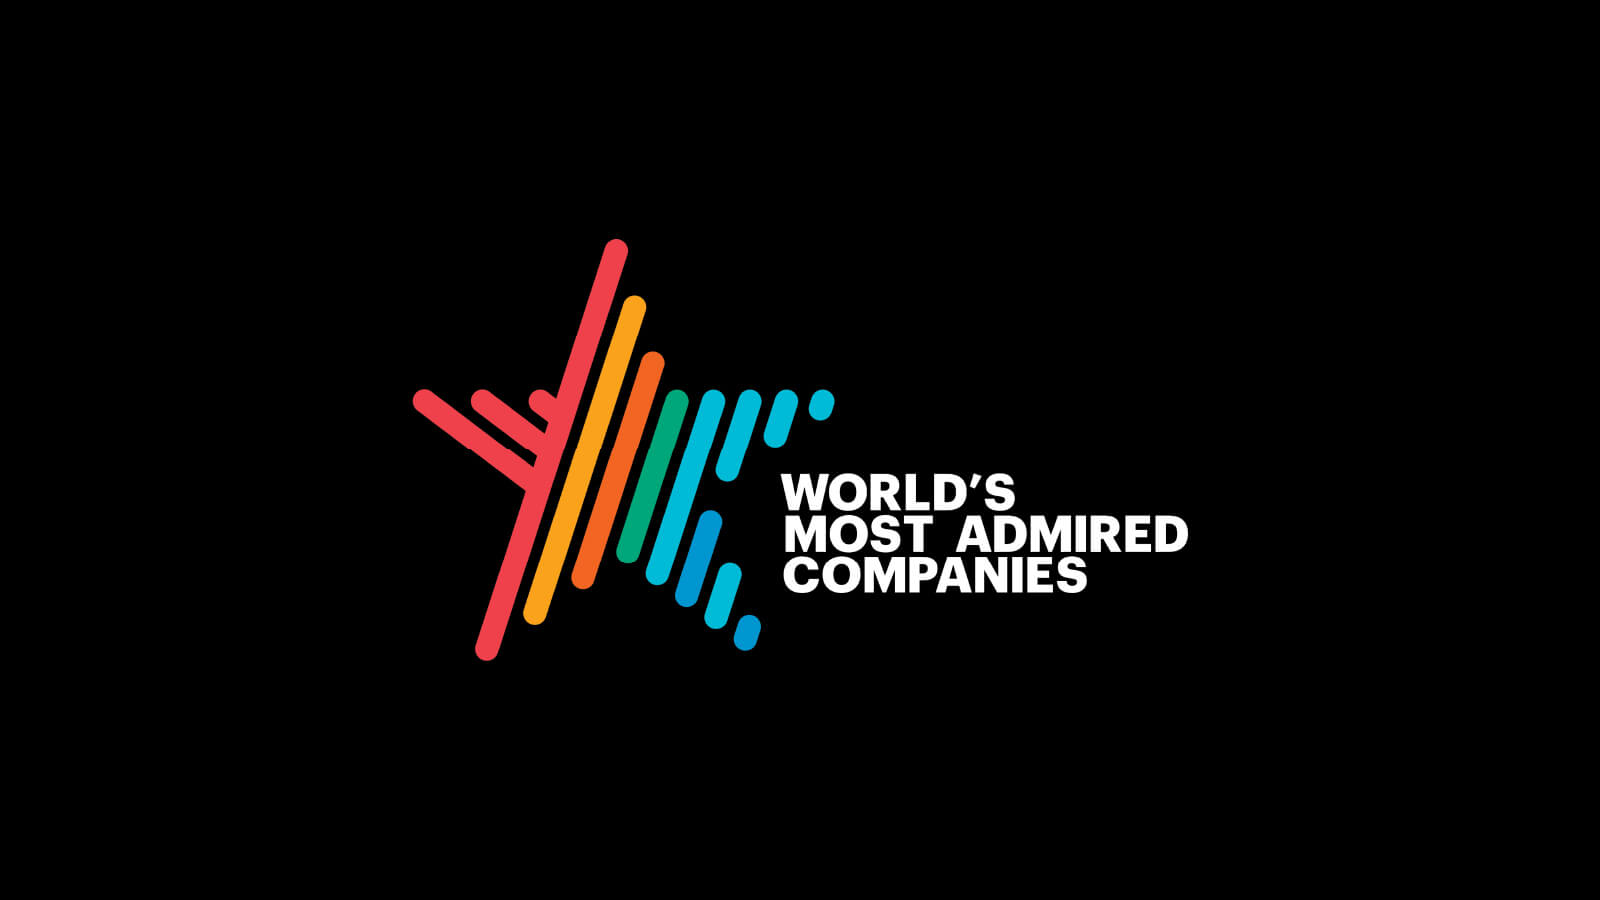 Logomark of Fortune Magazine’s &quot;World’s Most Admired Companies”